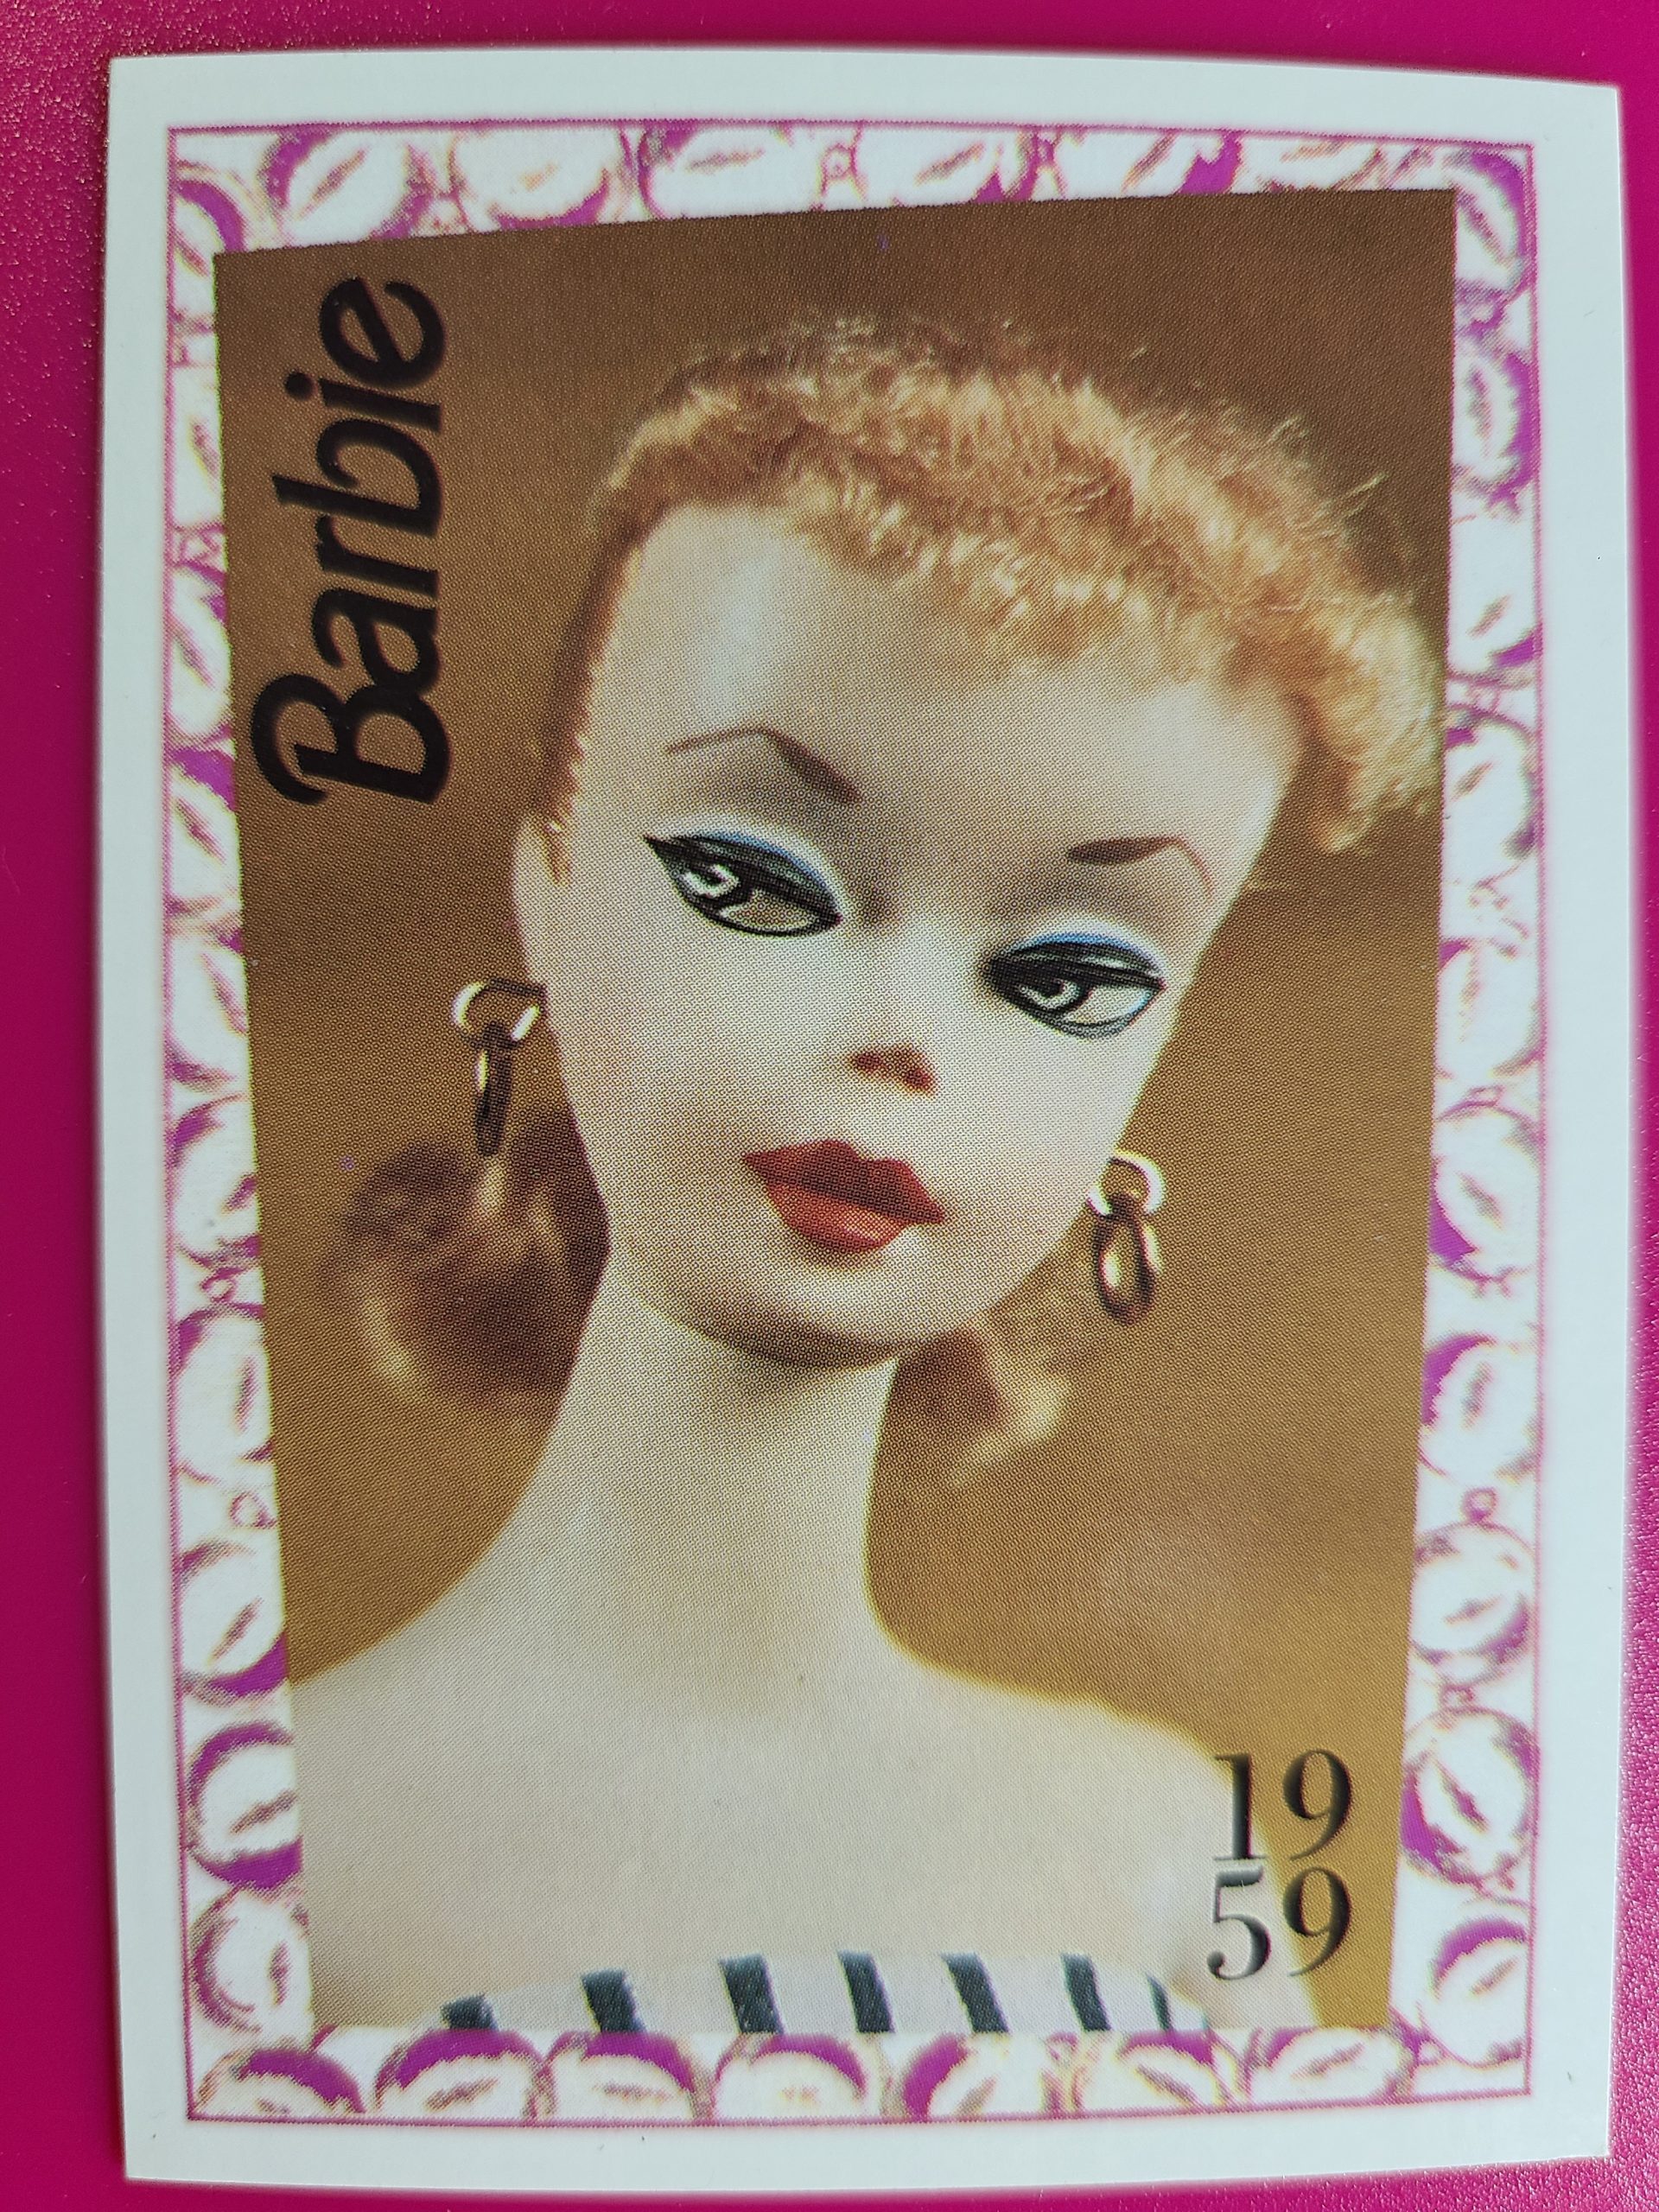 Barbie and Friends Trading Cards 1992